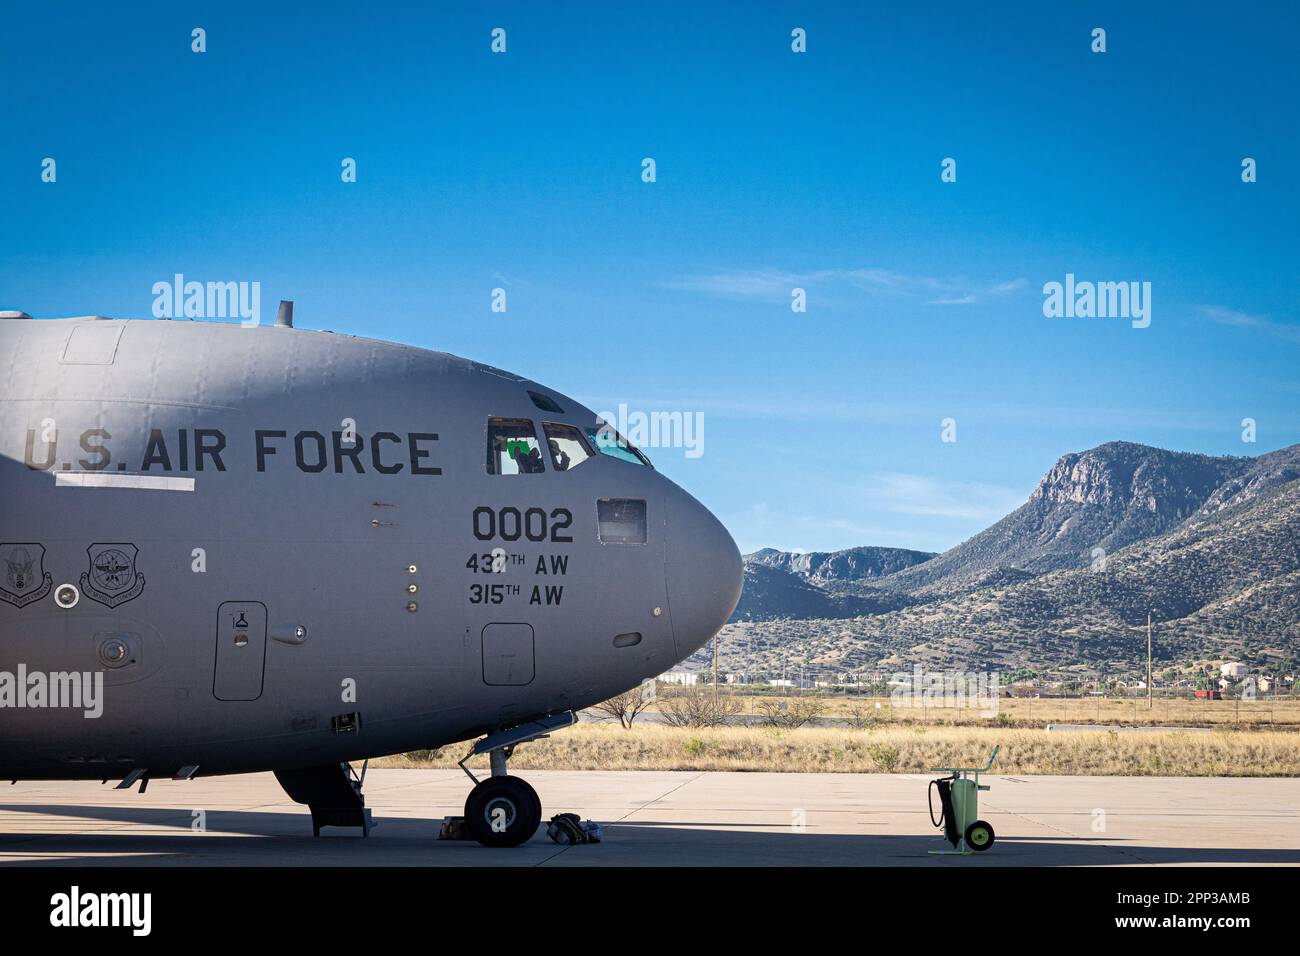 A U.S. Air Force C-17 Globemaster III aircraft assigned to the 16th Airlift Squadron, sits on the flight line of the Advanced Airlift Tactics Training Center, while attending the Advanced Tactics Airlift Course at Fort Huachuca, Arizona, April 18, 2023. The mission of the AATTC is increasing the warfighting effectiveness and survivability of mobility forces. Since 1983 the AATTC has provided advanced tactical training to mobility aircrews from the Air National Guard, Air Force Reserve Command, Air Mobility Command, Air Combat Command, Air Force Special Operations Command, United States Marine Stock Photo